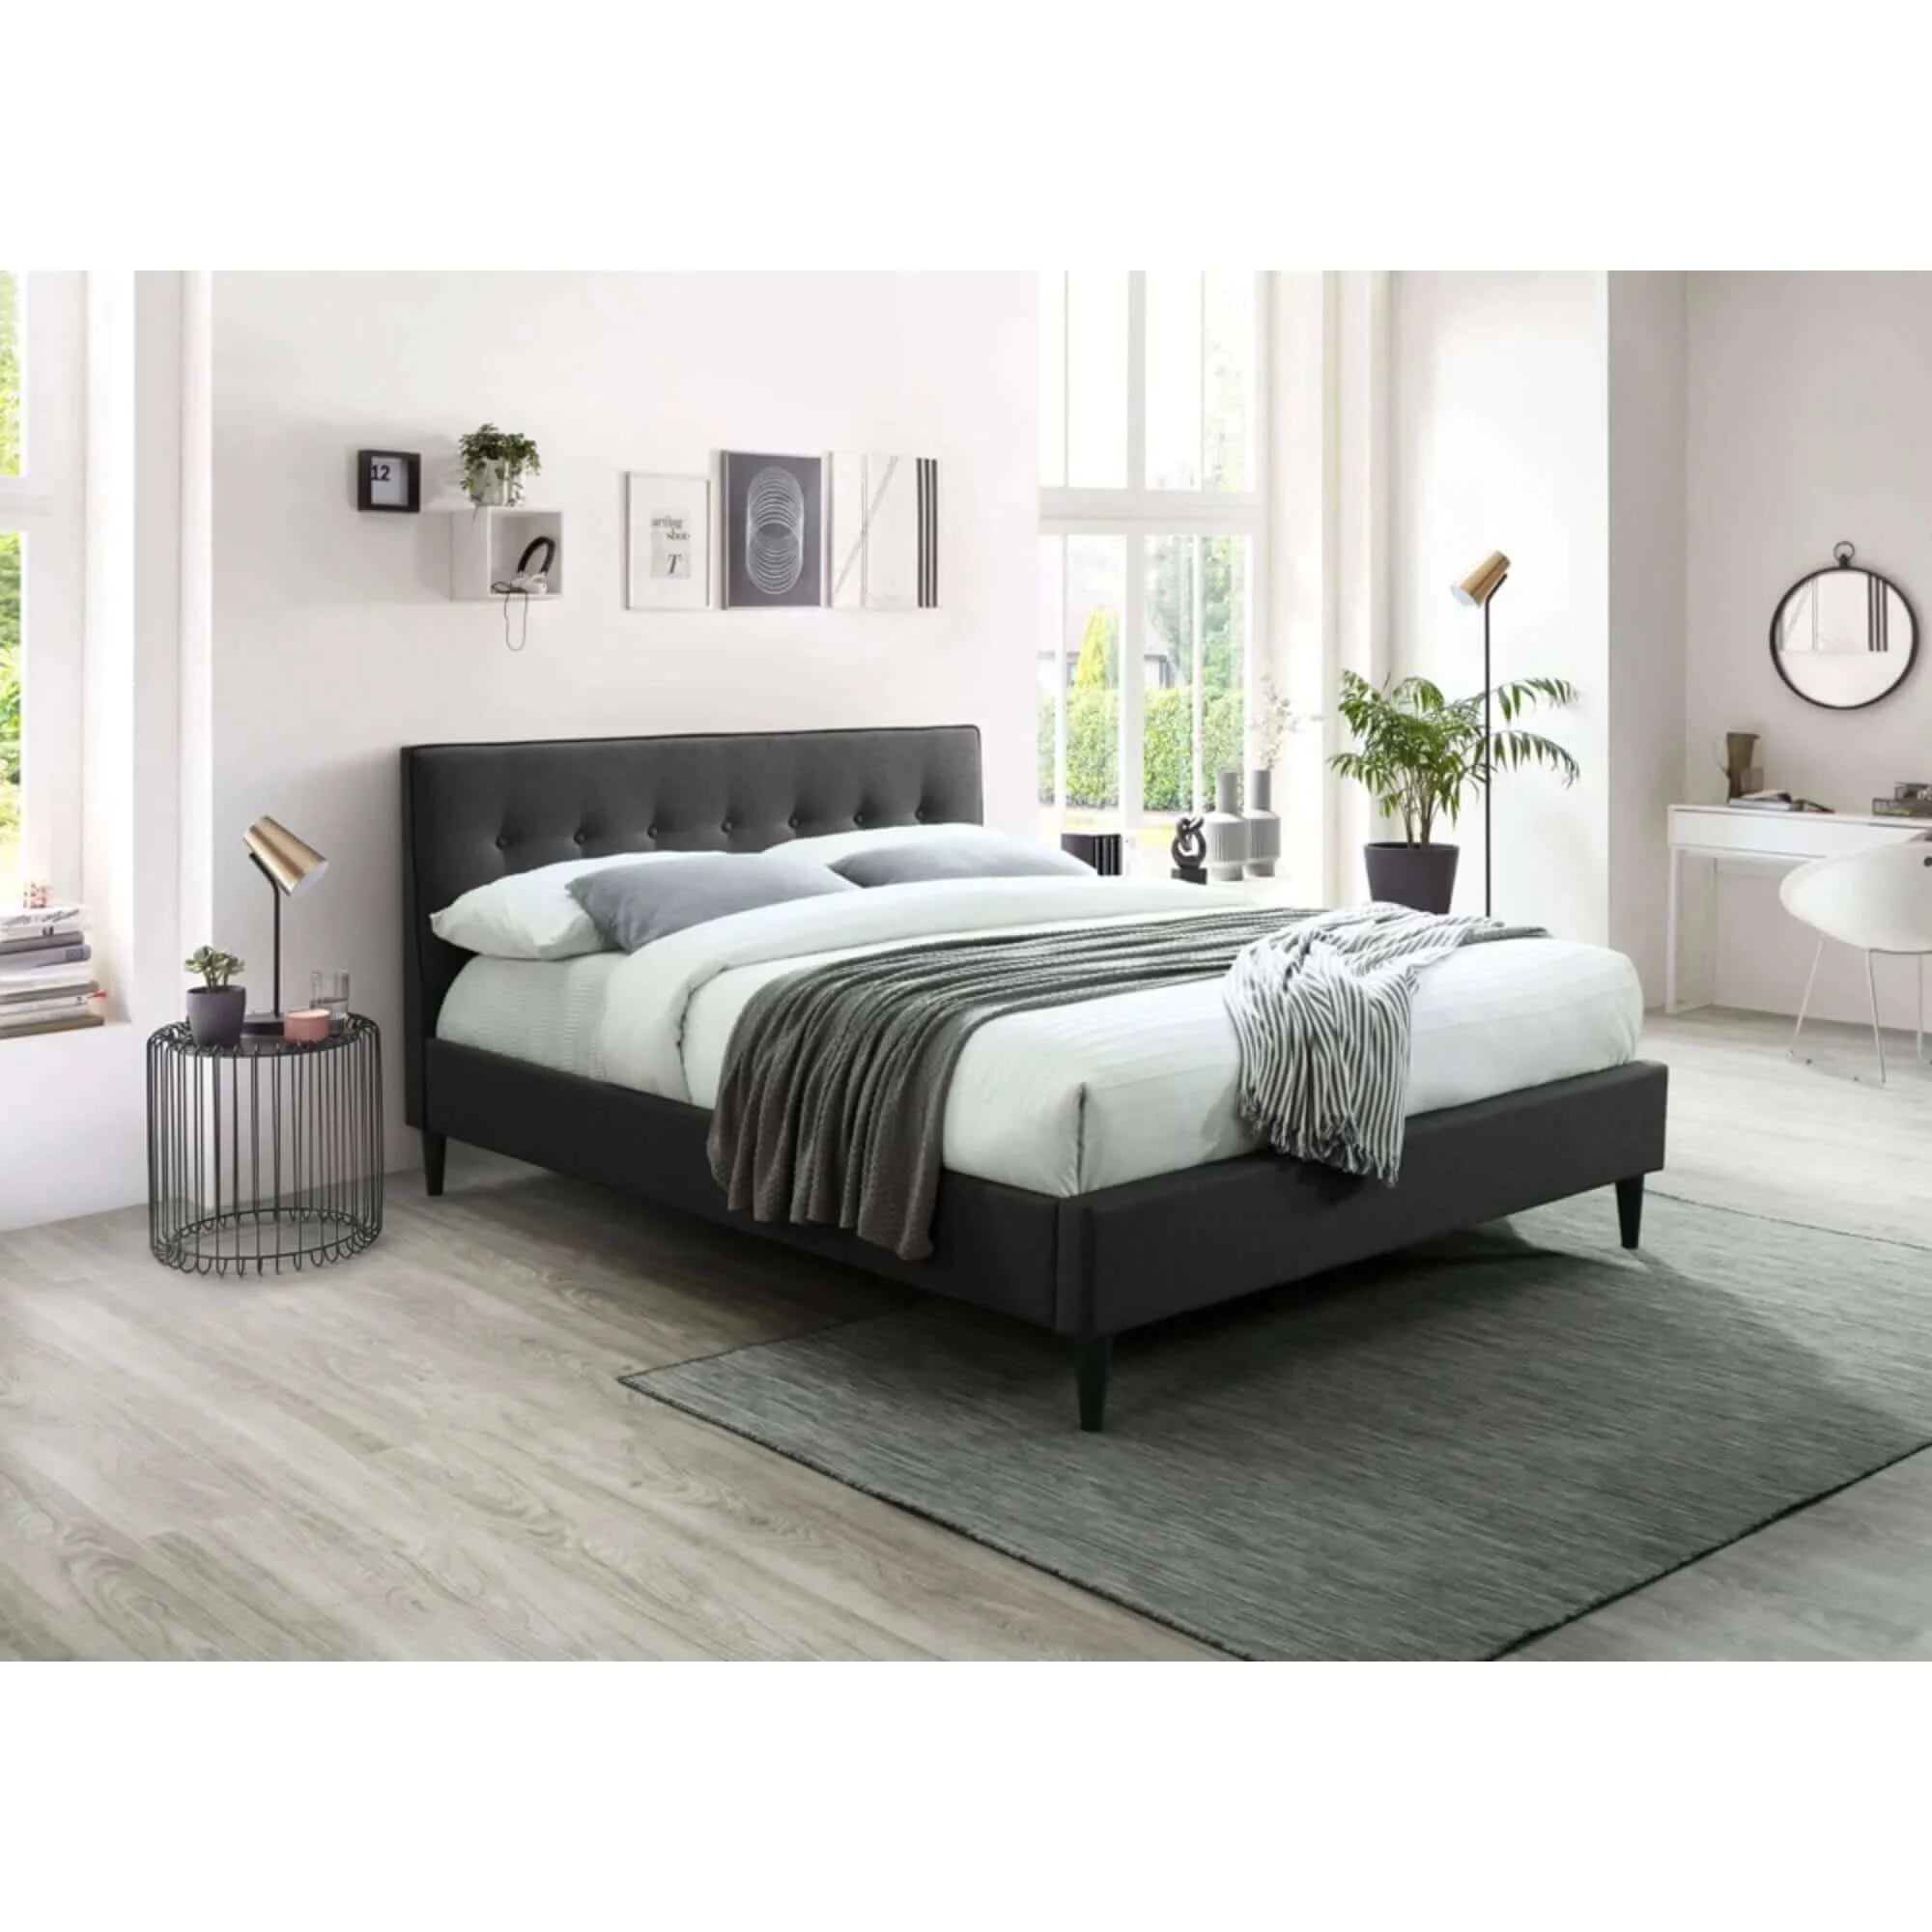 Buy buttercup double size bed frame timber mattress base fabric upholstered - grey - upinteriors-Upinteriors